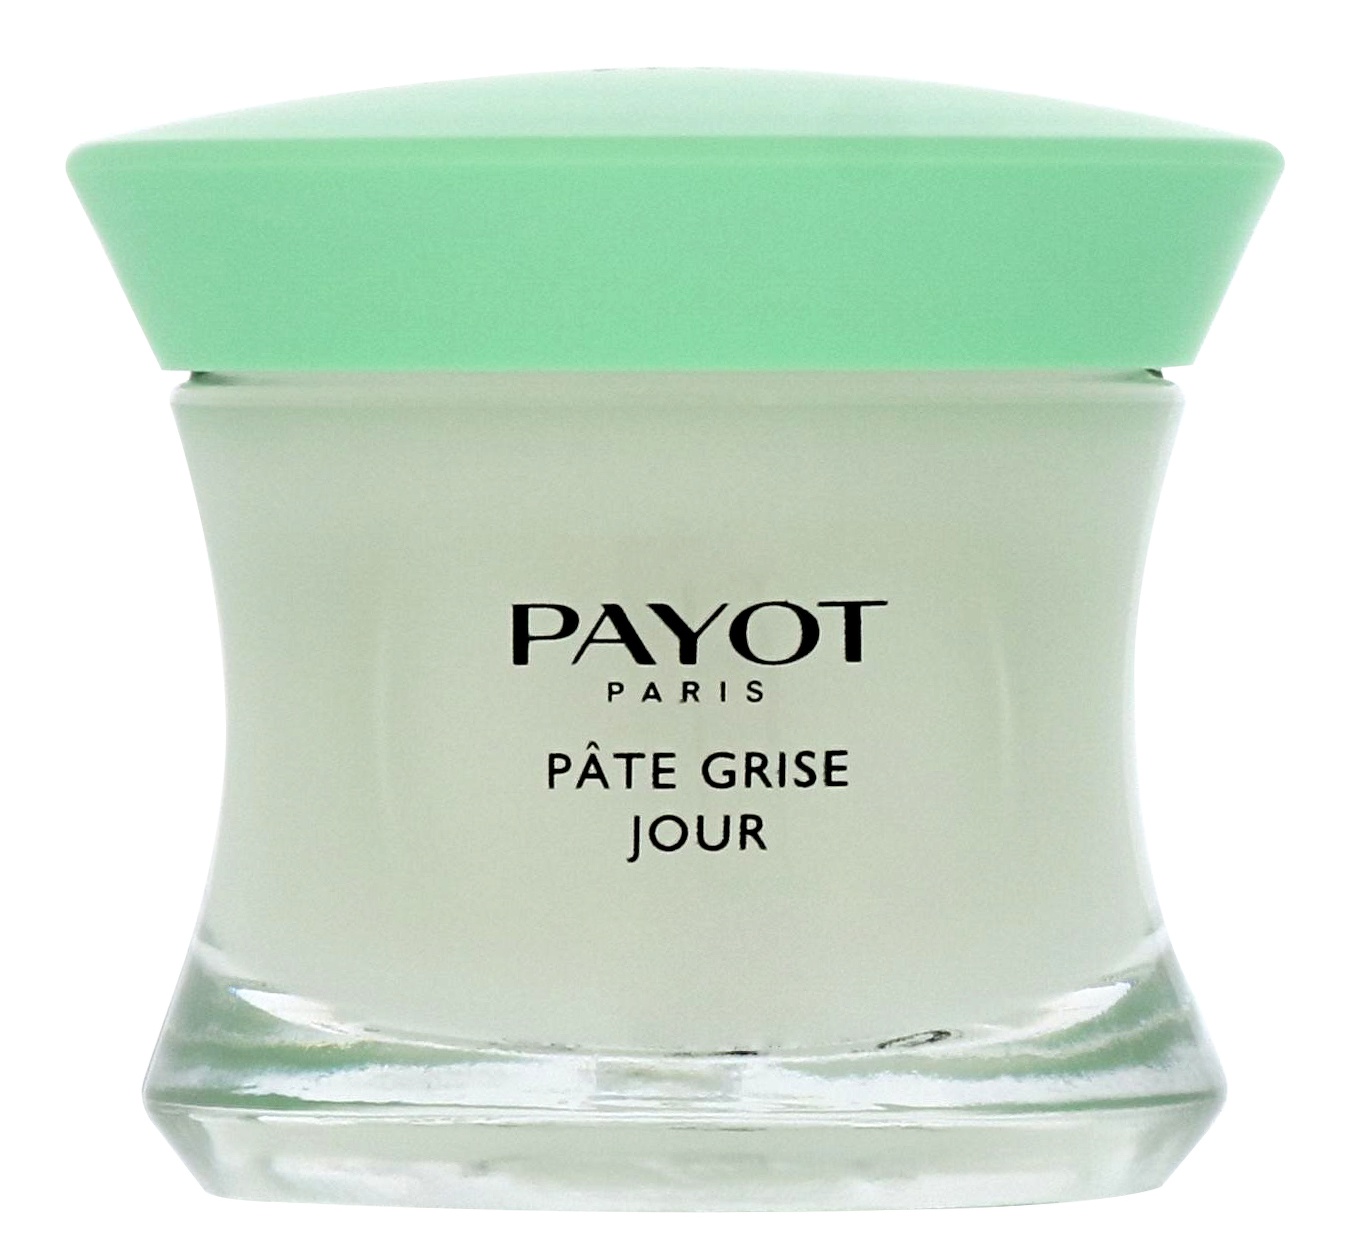 Payot Pate Grise Jour